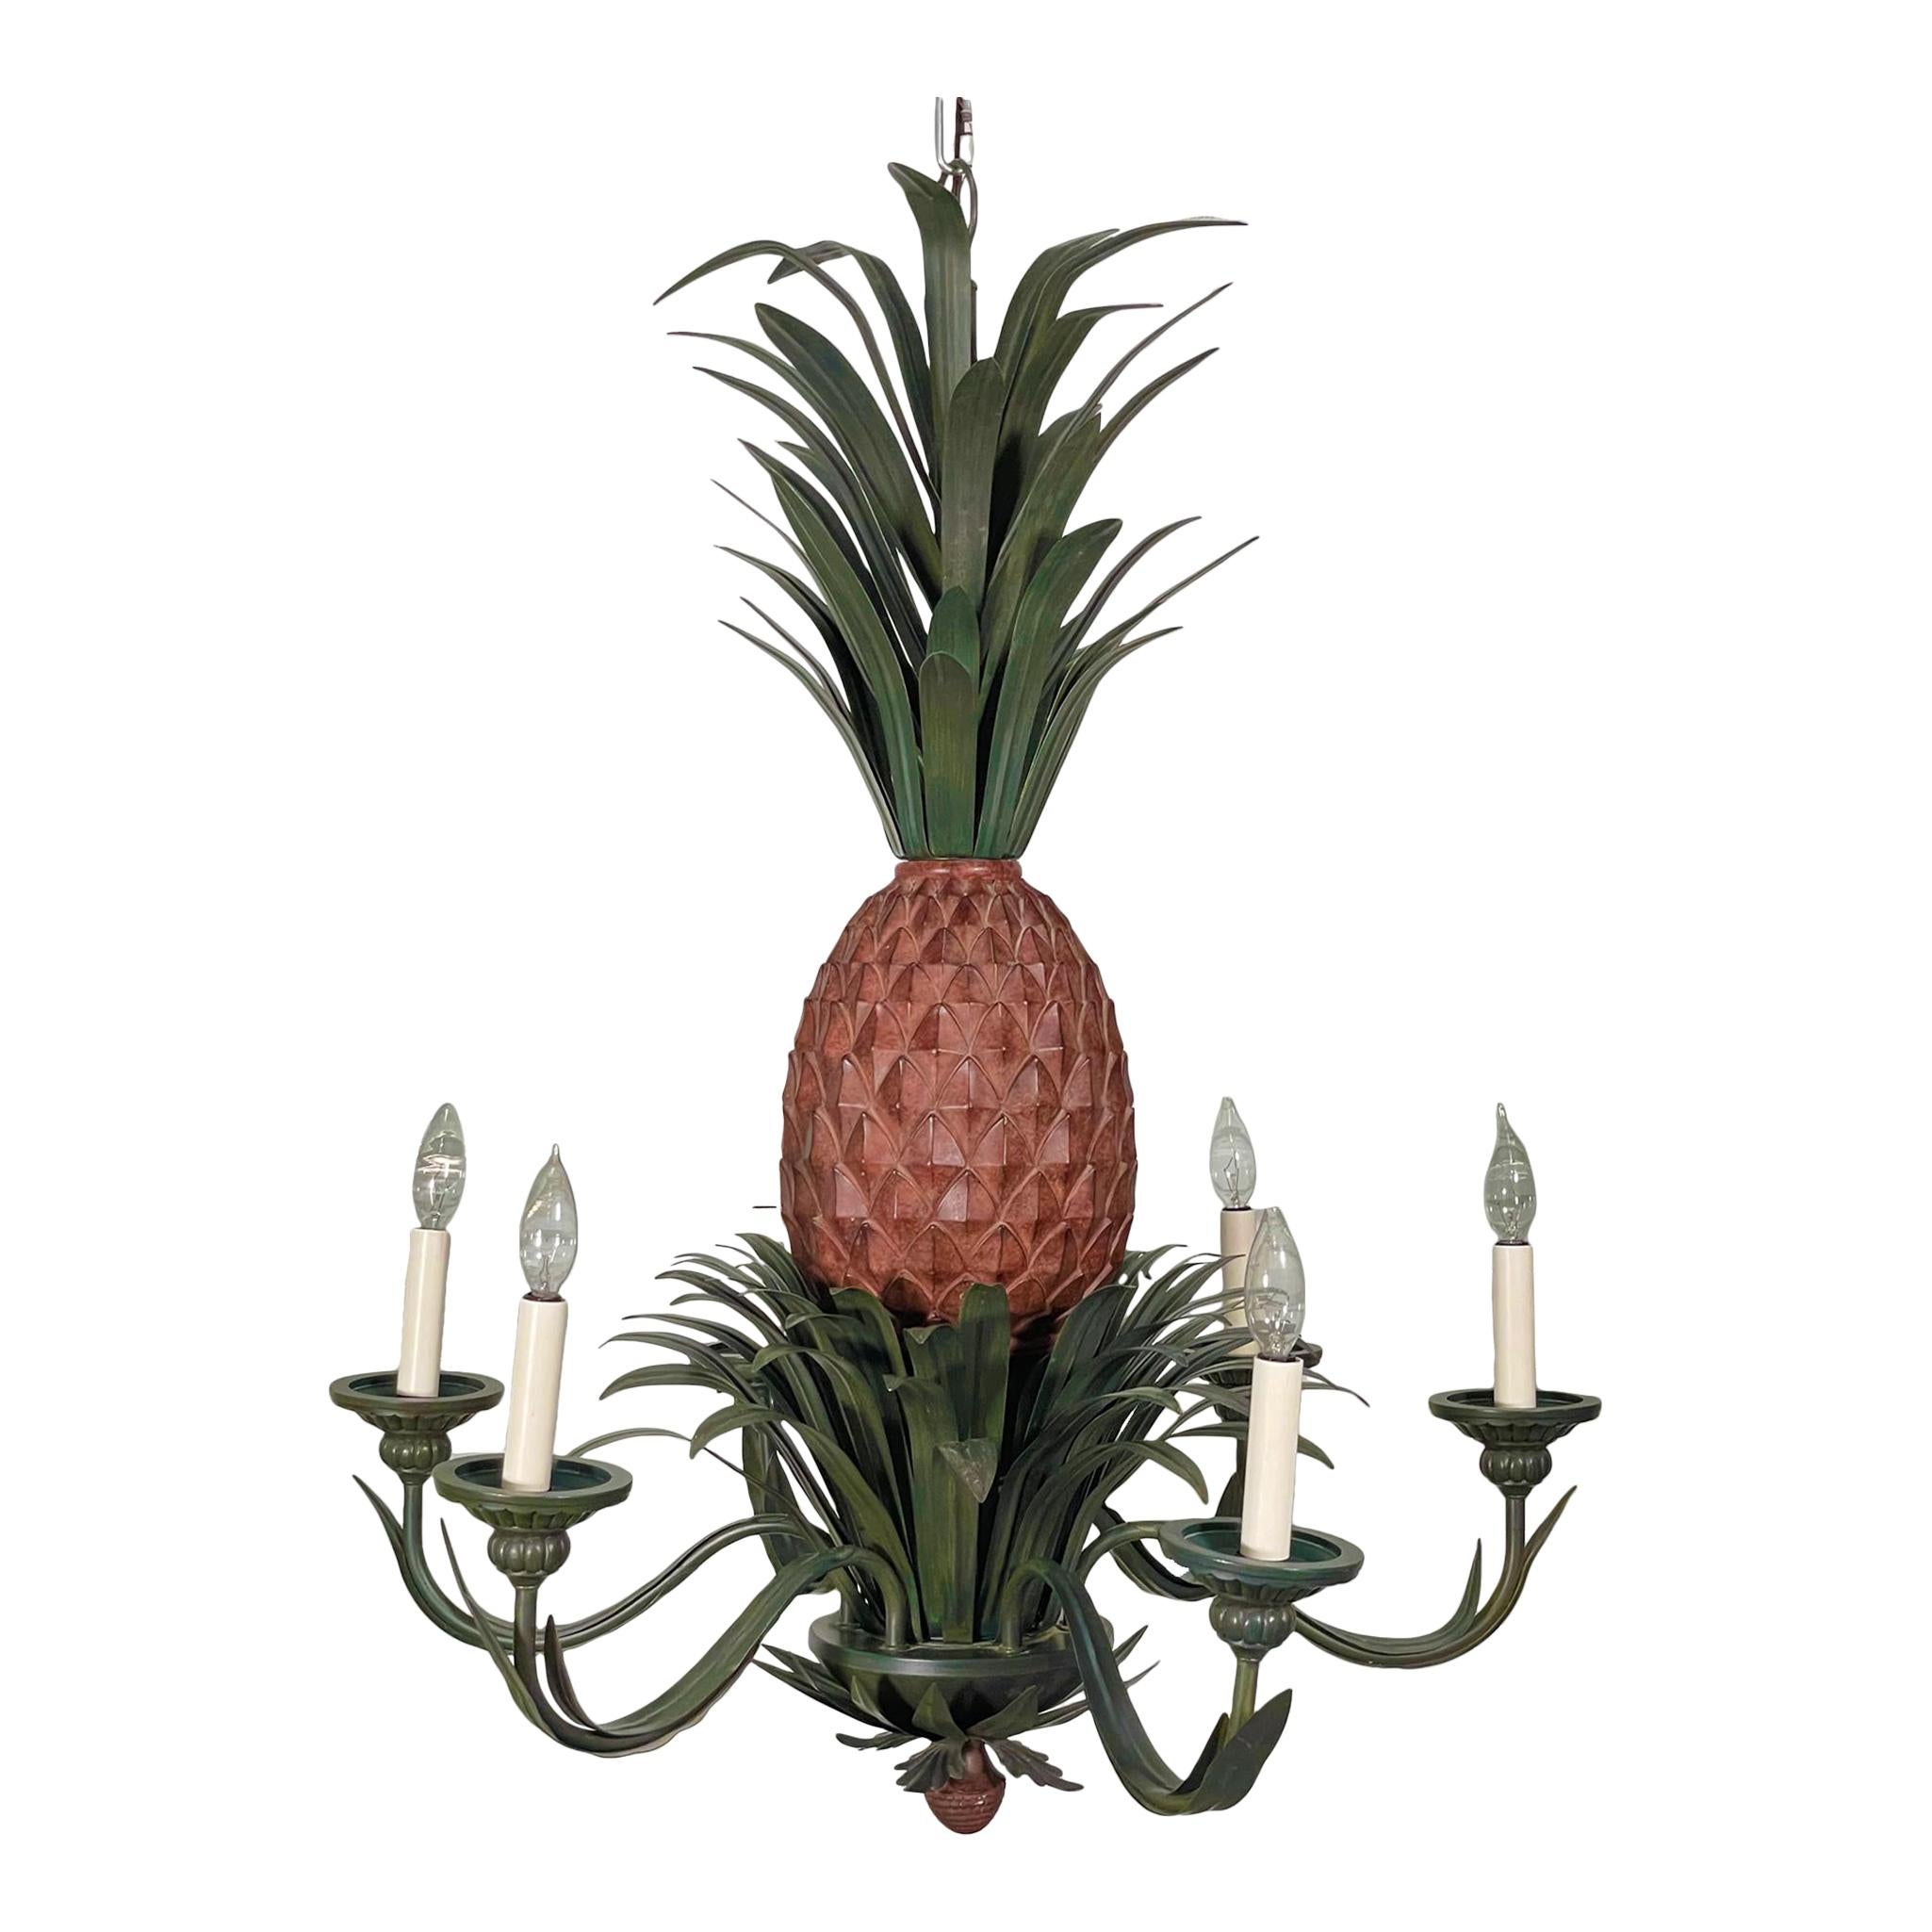 Large 6-arm chandelier features a sculptural pineapple center with tole metal fronds above and below. Good condition with imperfections consistent with age, see photos for condition details. We have two of these in stock, enquire if interested.
For